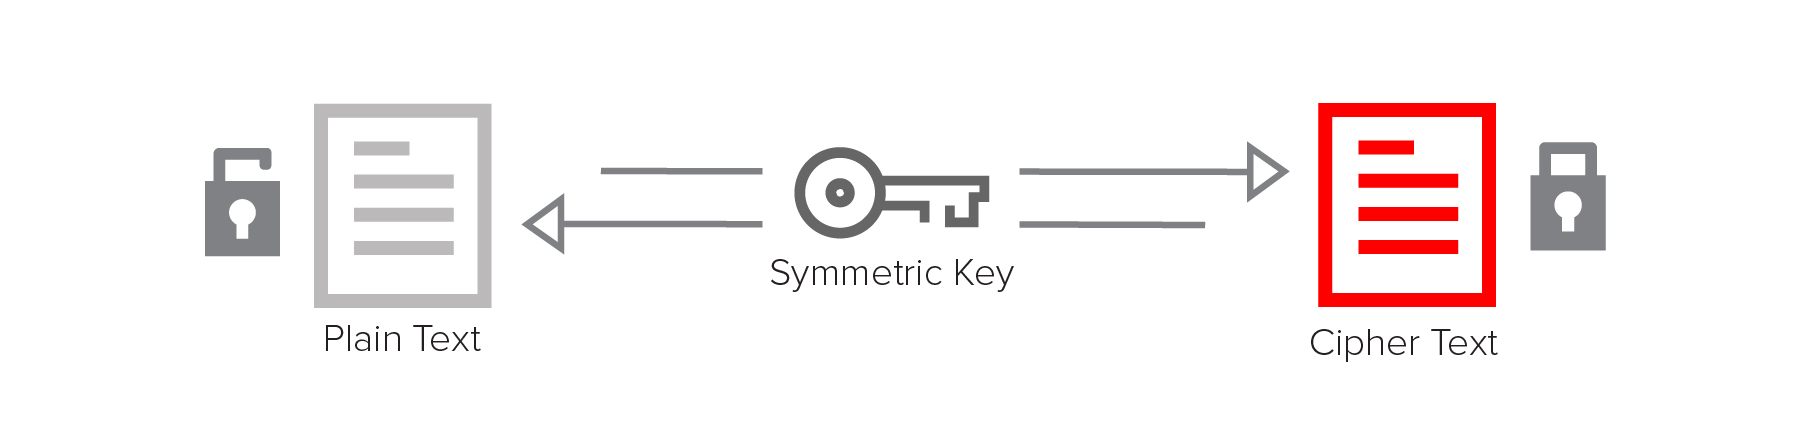 A symmetric key is used for both encrypt and decrypt